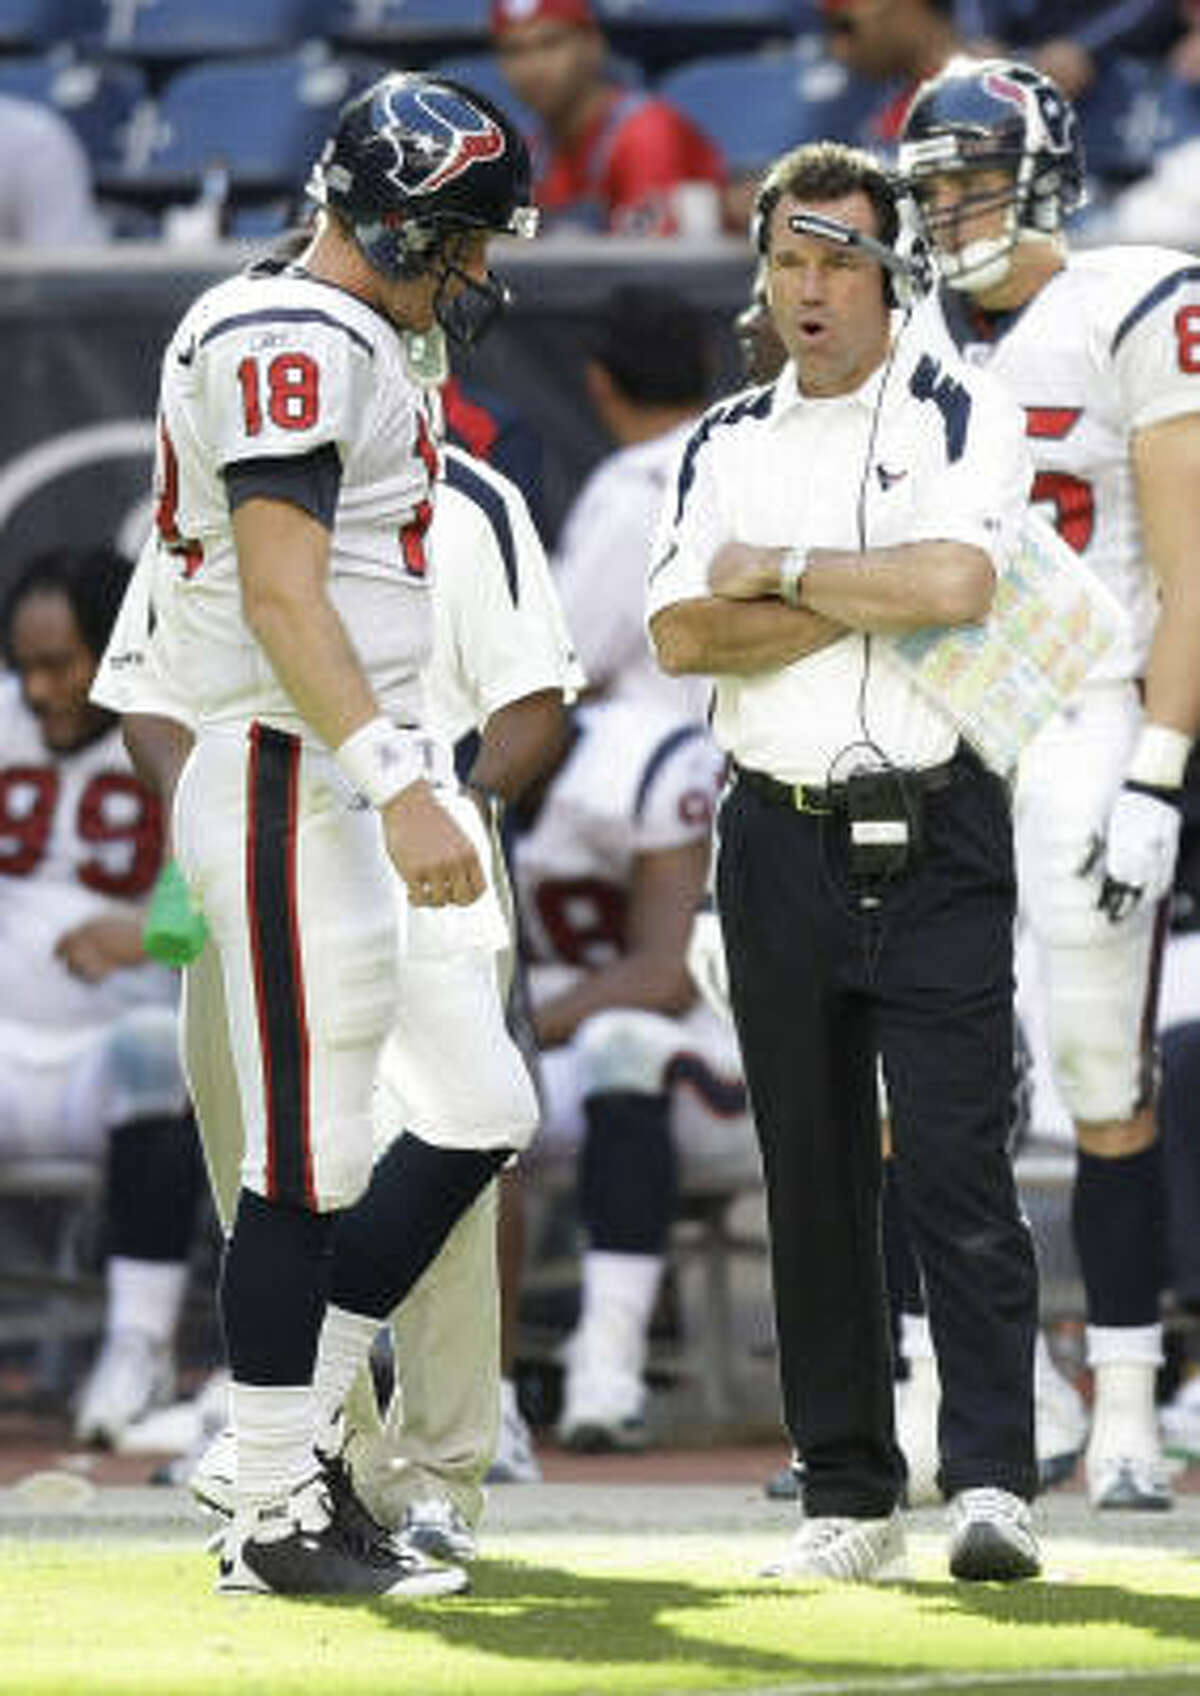 Despite another loss on Sunday, Texans players have head coach Gary Kubiak's back.